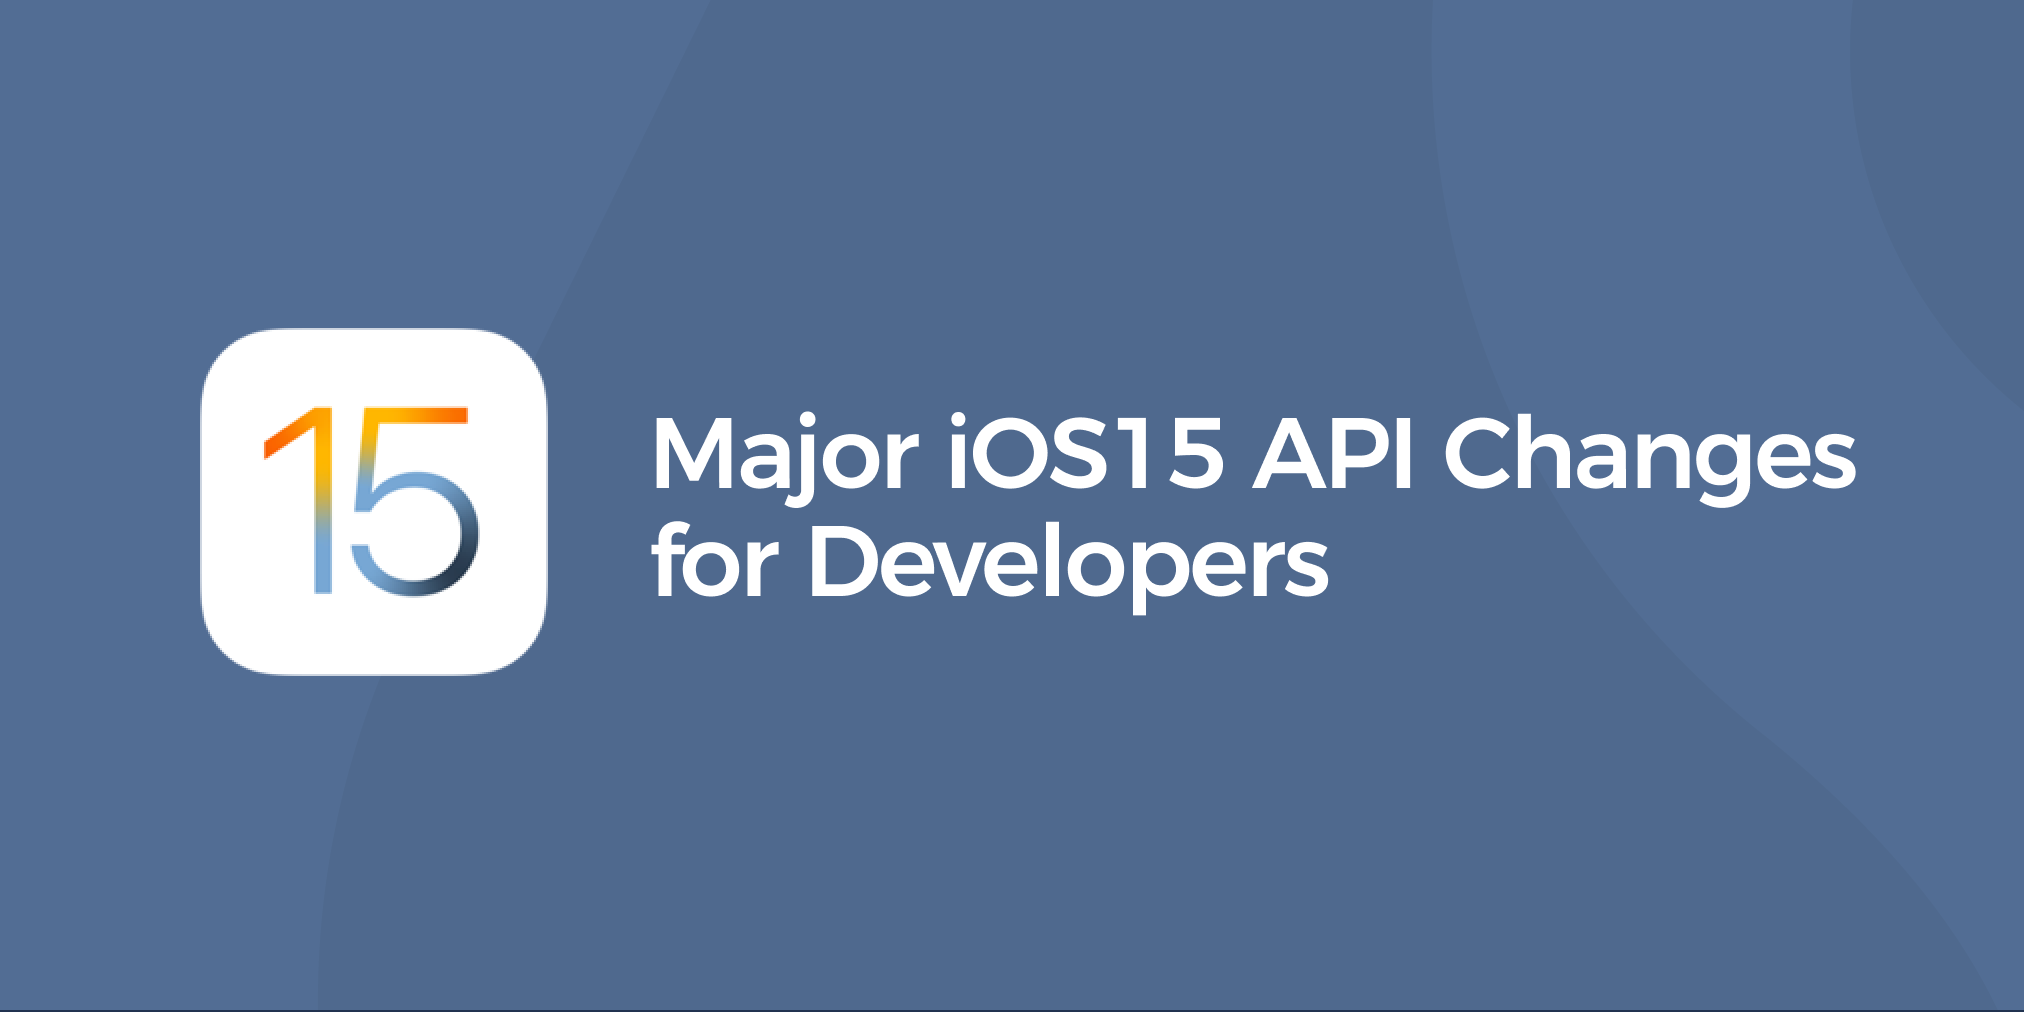 Major iOS 15 API Changes for Developers